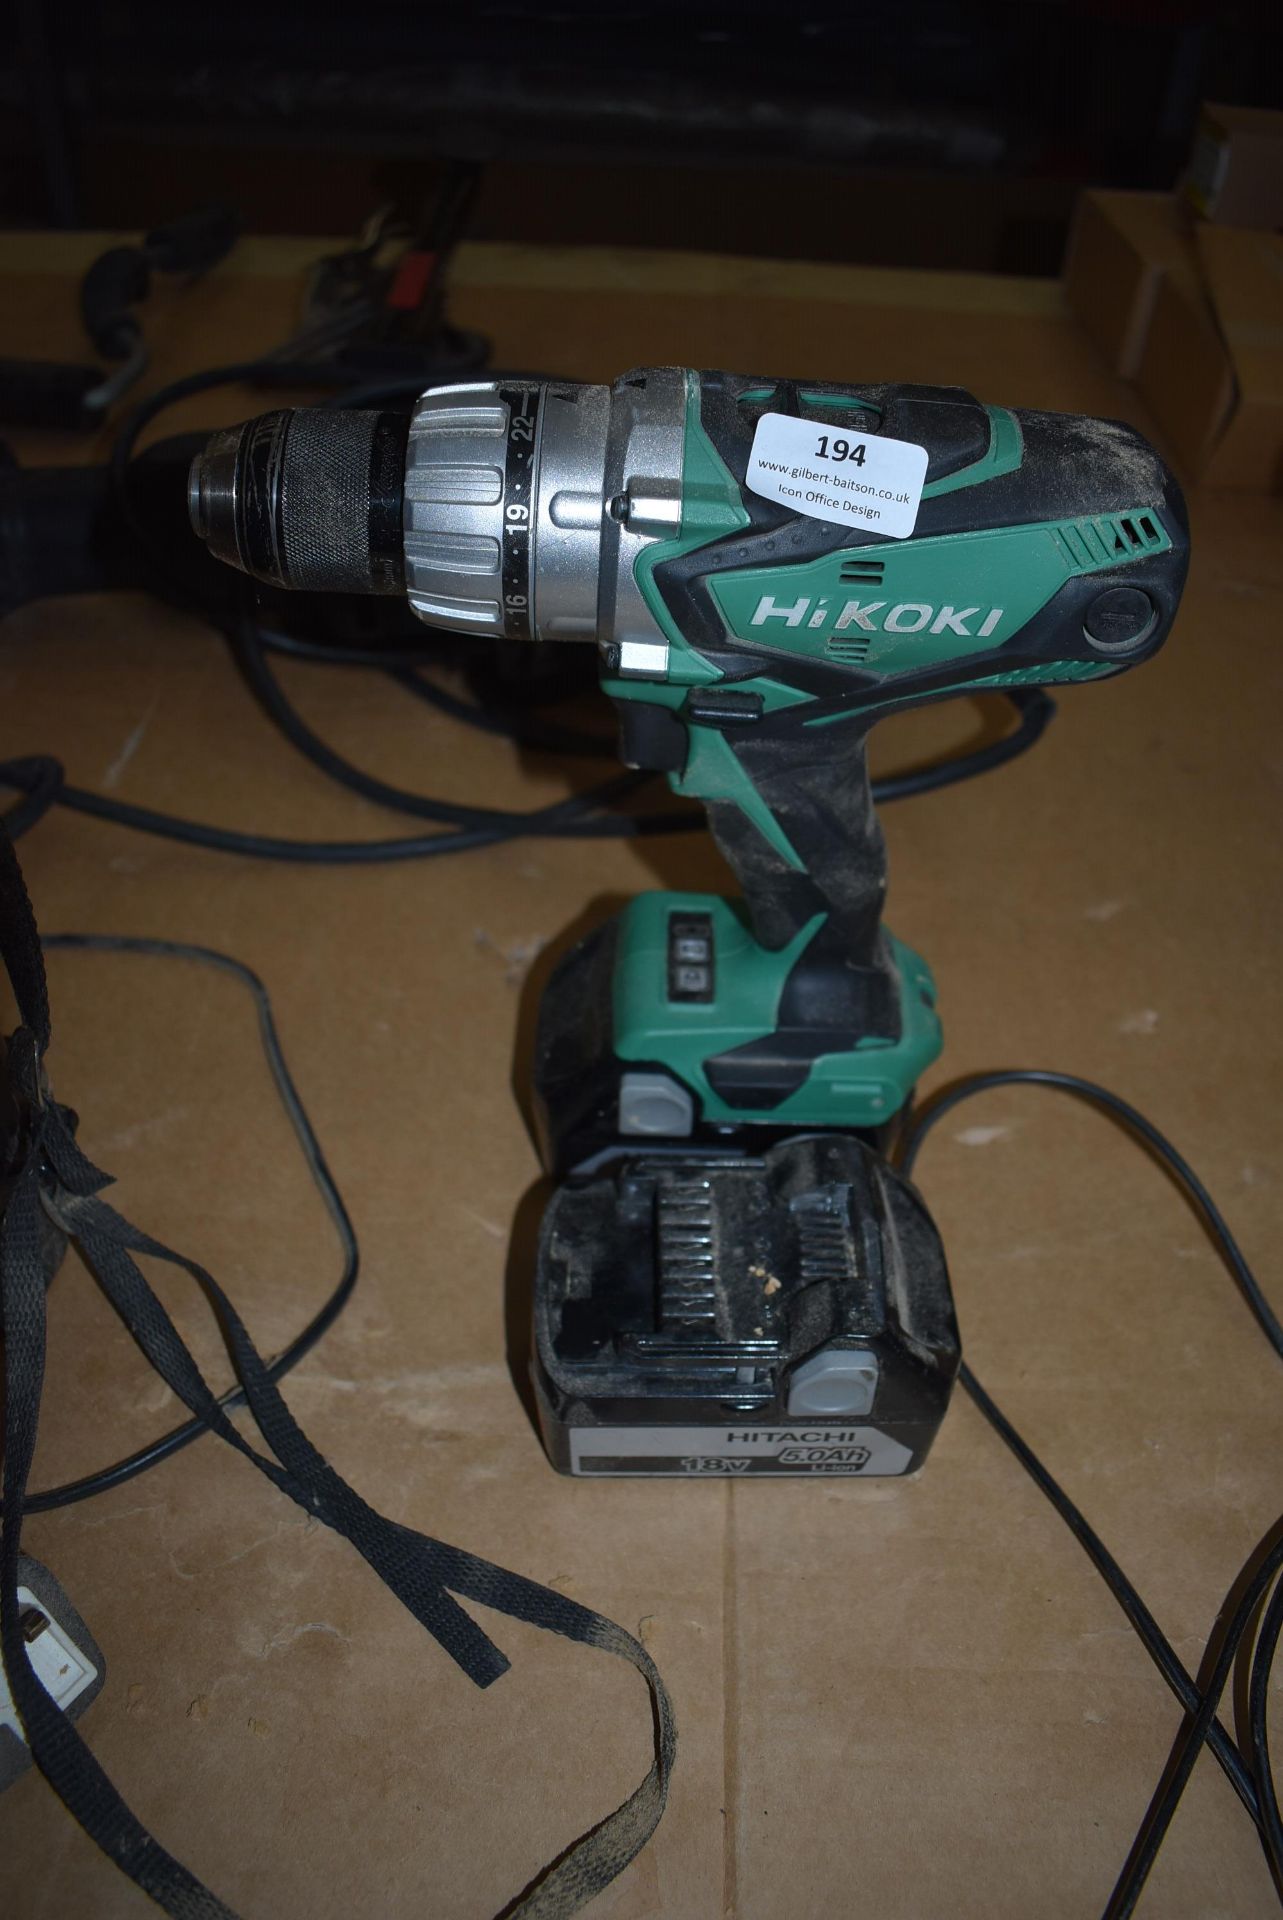 *Hikoki by Hitachi 18v Cordless Drill with Spare Battery (no charger)